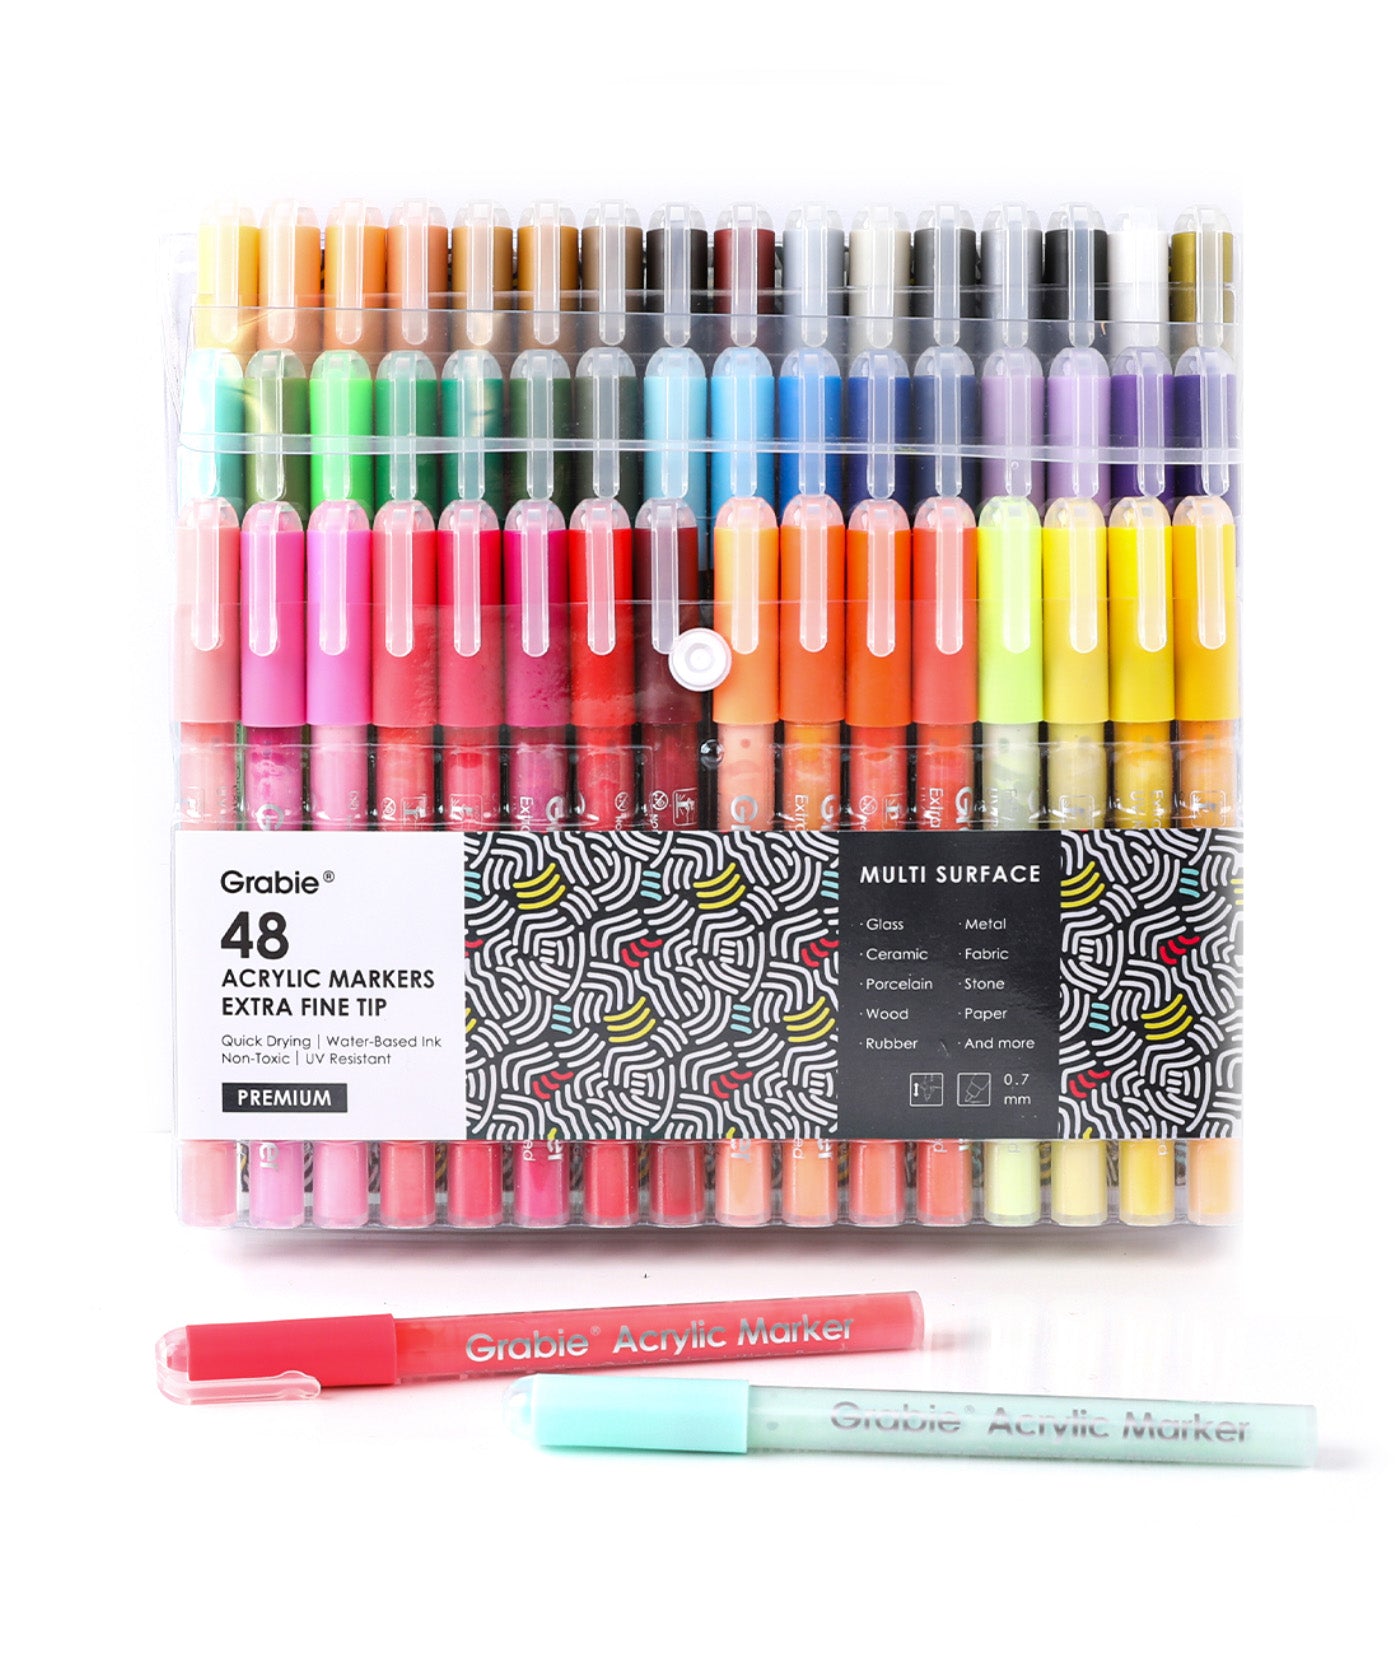 Acrylic Markers Paint Pens Quick Dry Acrylic Pens Waterproof Fine